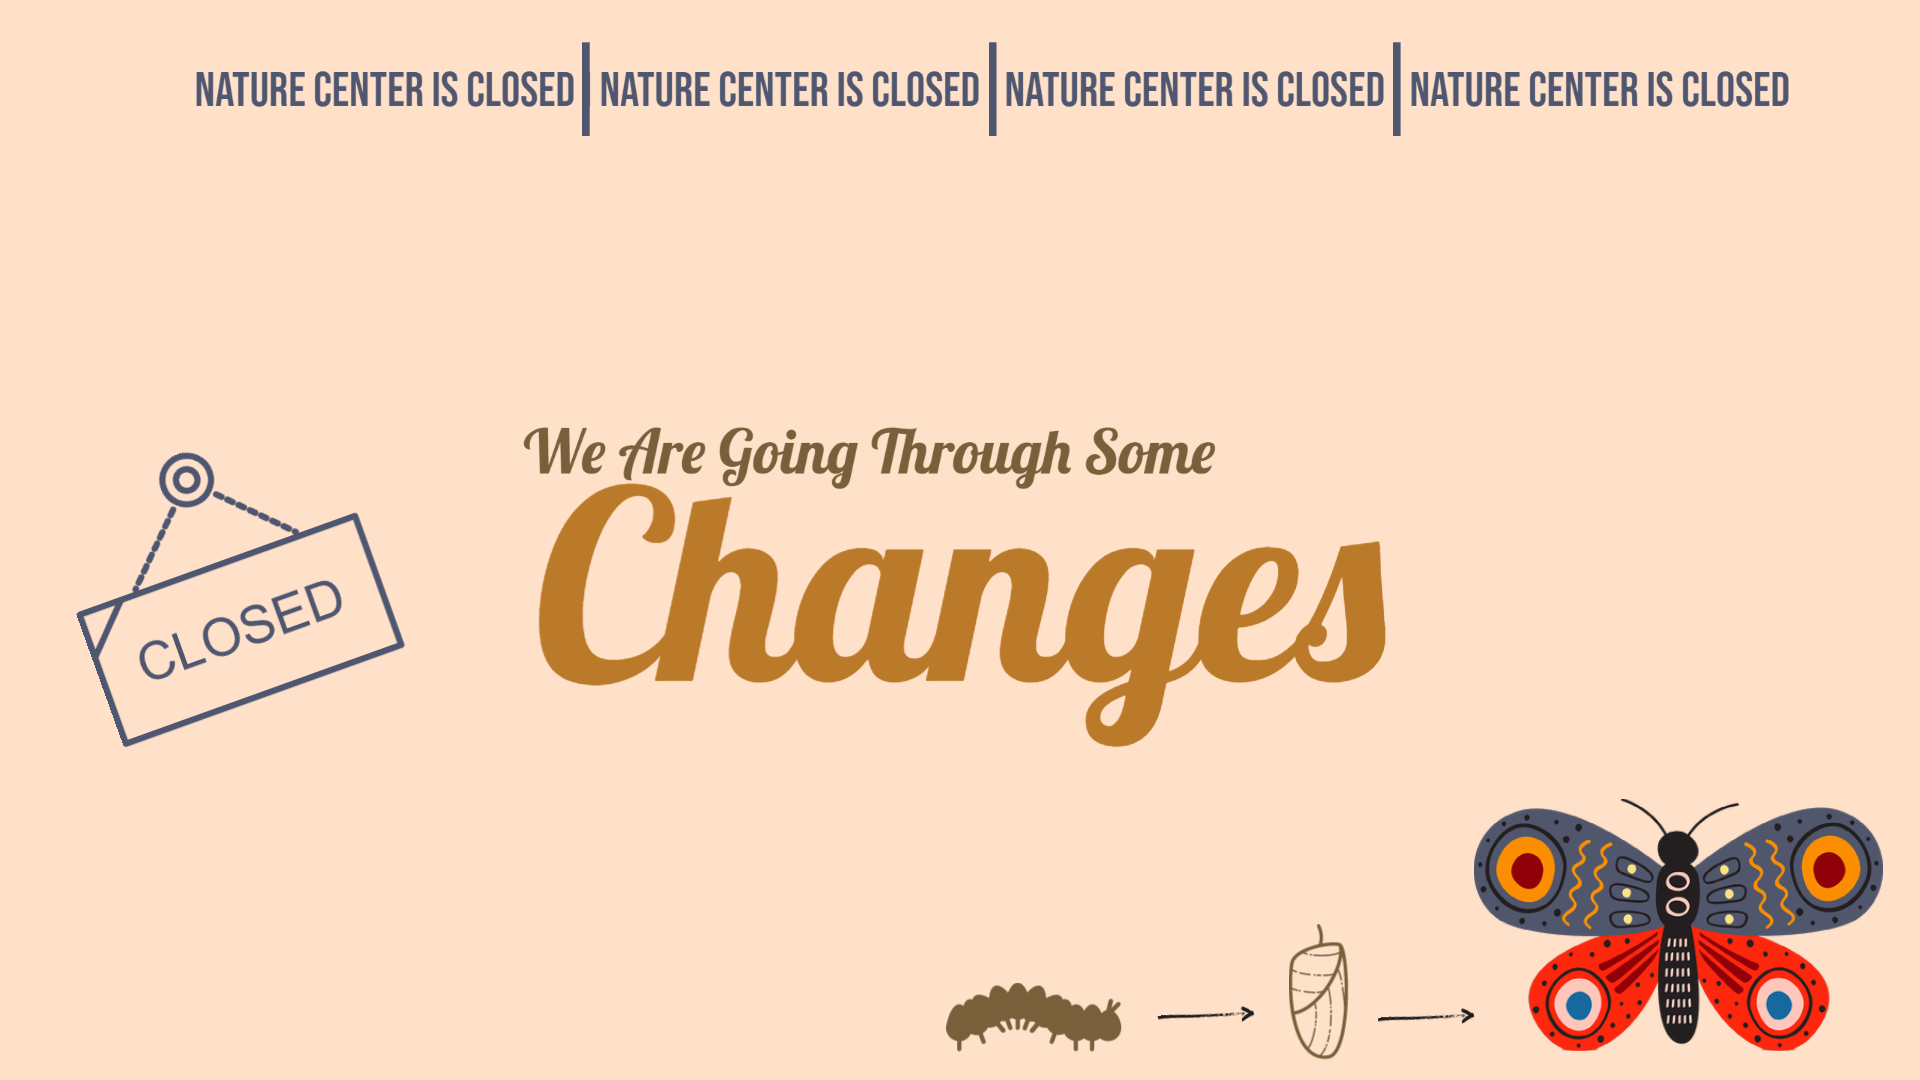 An graphic that says "we are going through some changes. The nature center is closed"